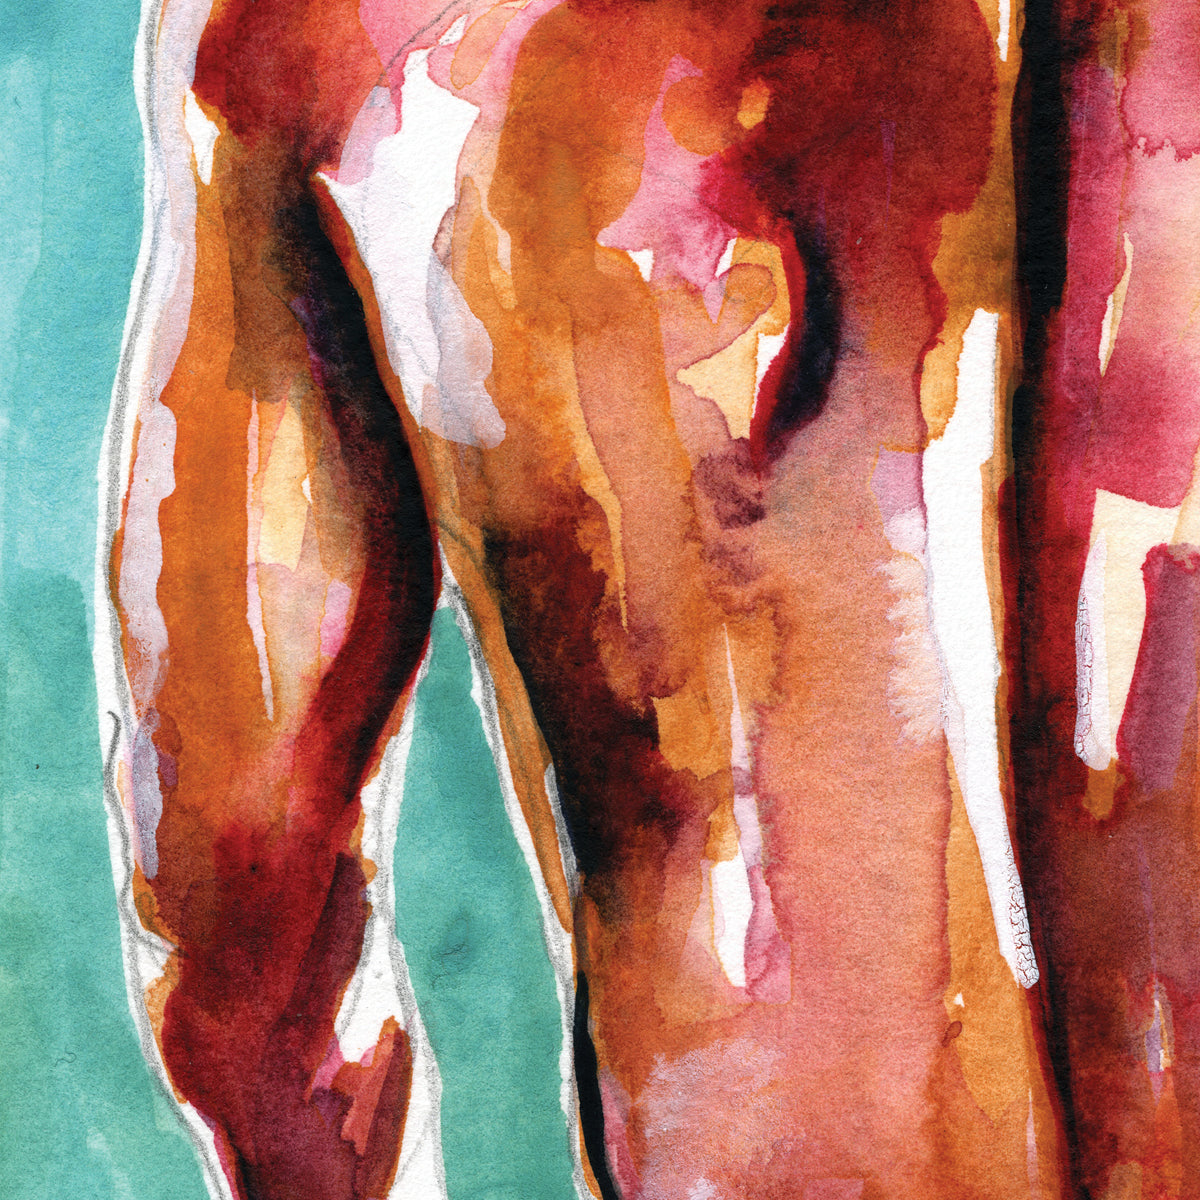 Muscular Male Back, Defined Physique and Sculpted Posture - Giclee Art Print